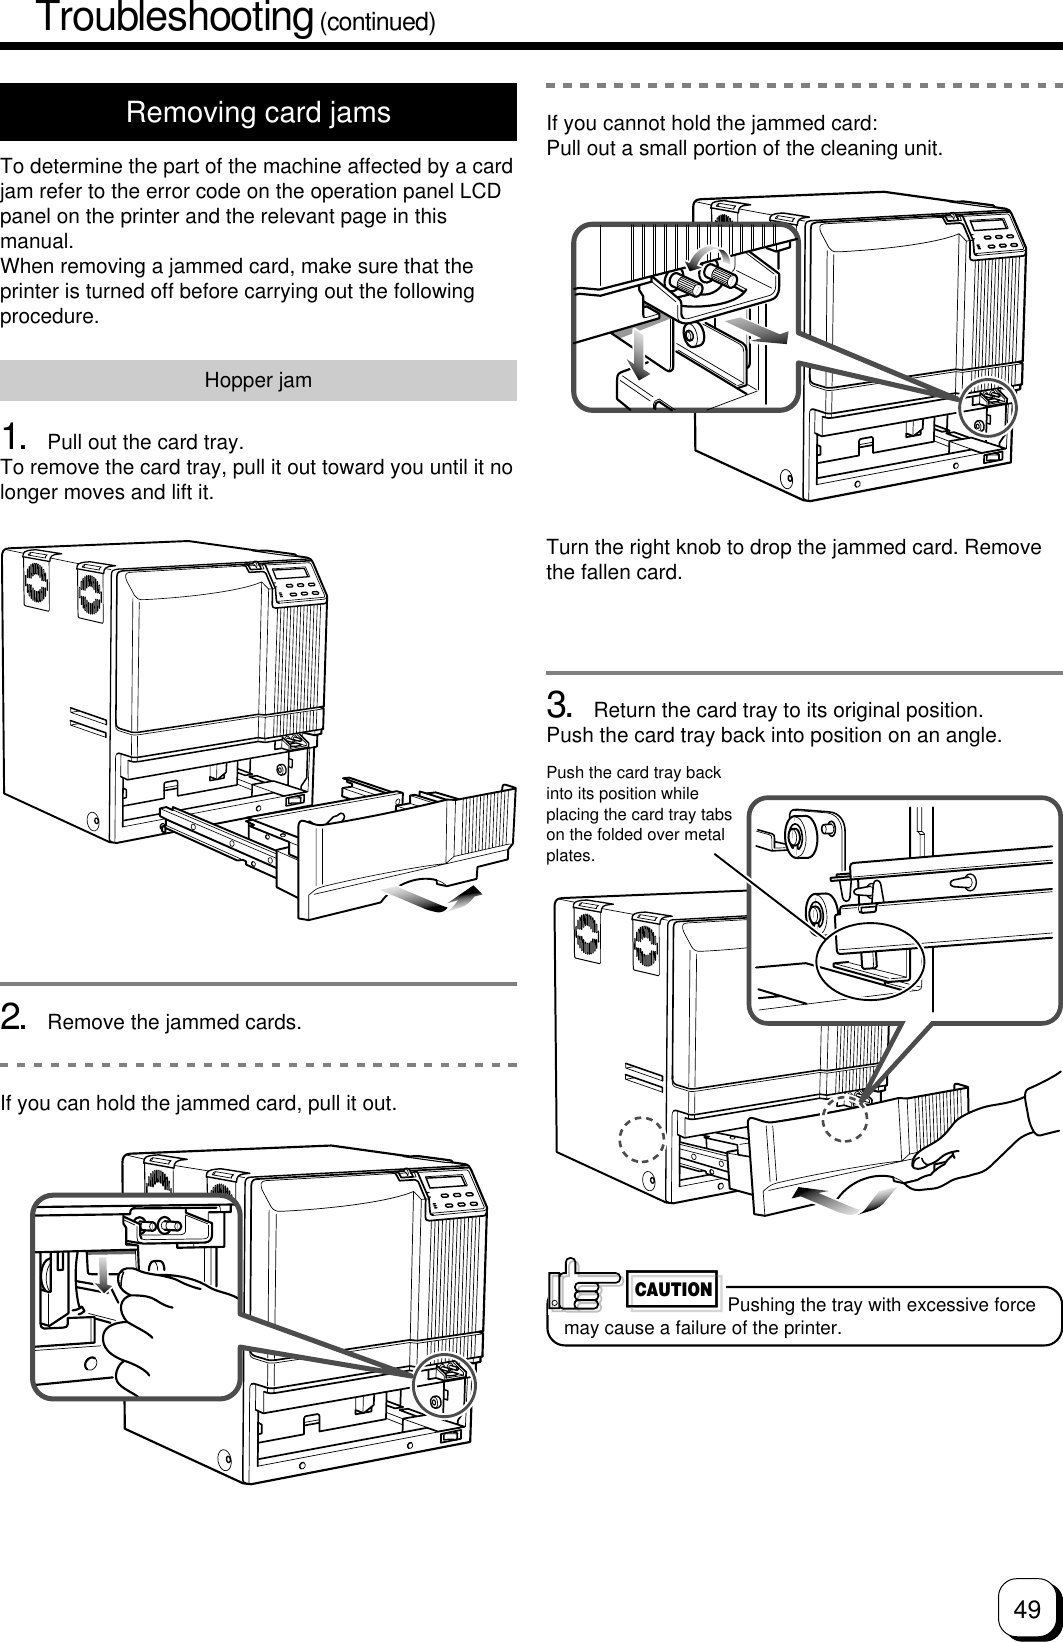 49Troubleshooting (continued)Removing card jamsTo determine the part of the machine affected by a cardjam refer to the error code on the operation panel LCDpanel on the printer and the relevant page in thismanual.When removing a jammed card, make sure that theprinter is turned off before carrying out the followingprocedure.Hopper jam1. Pull out the card tray.To remove the card tray, pull it out toward you until it nolonger moves and lift it.2. Remove the jammed cards.If you can hold the jammed card, pull it out.3. Return the card tray to its original position.Push the card tray back into position on an angle.Push the card tray backinto its position whileplacing the card tray tabson the folded over metalplates.If you cannot hold the jammed card:Pull out a small portion of the cleaning unit.Turn the right knob to drop the jammed card. Removethe fallen card.Pushing the tray with excessive forcemay cause a failure of the printer.CAUTION